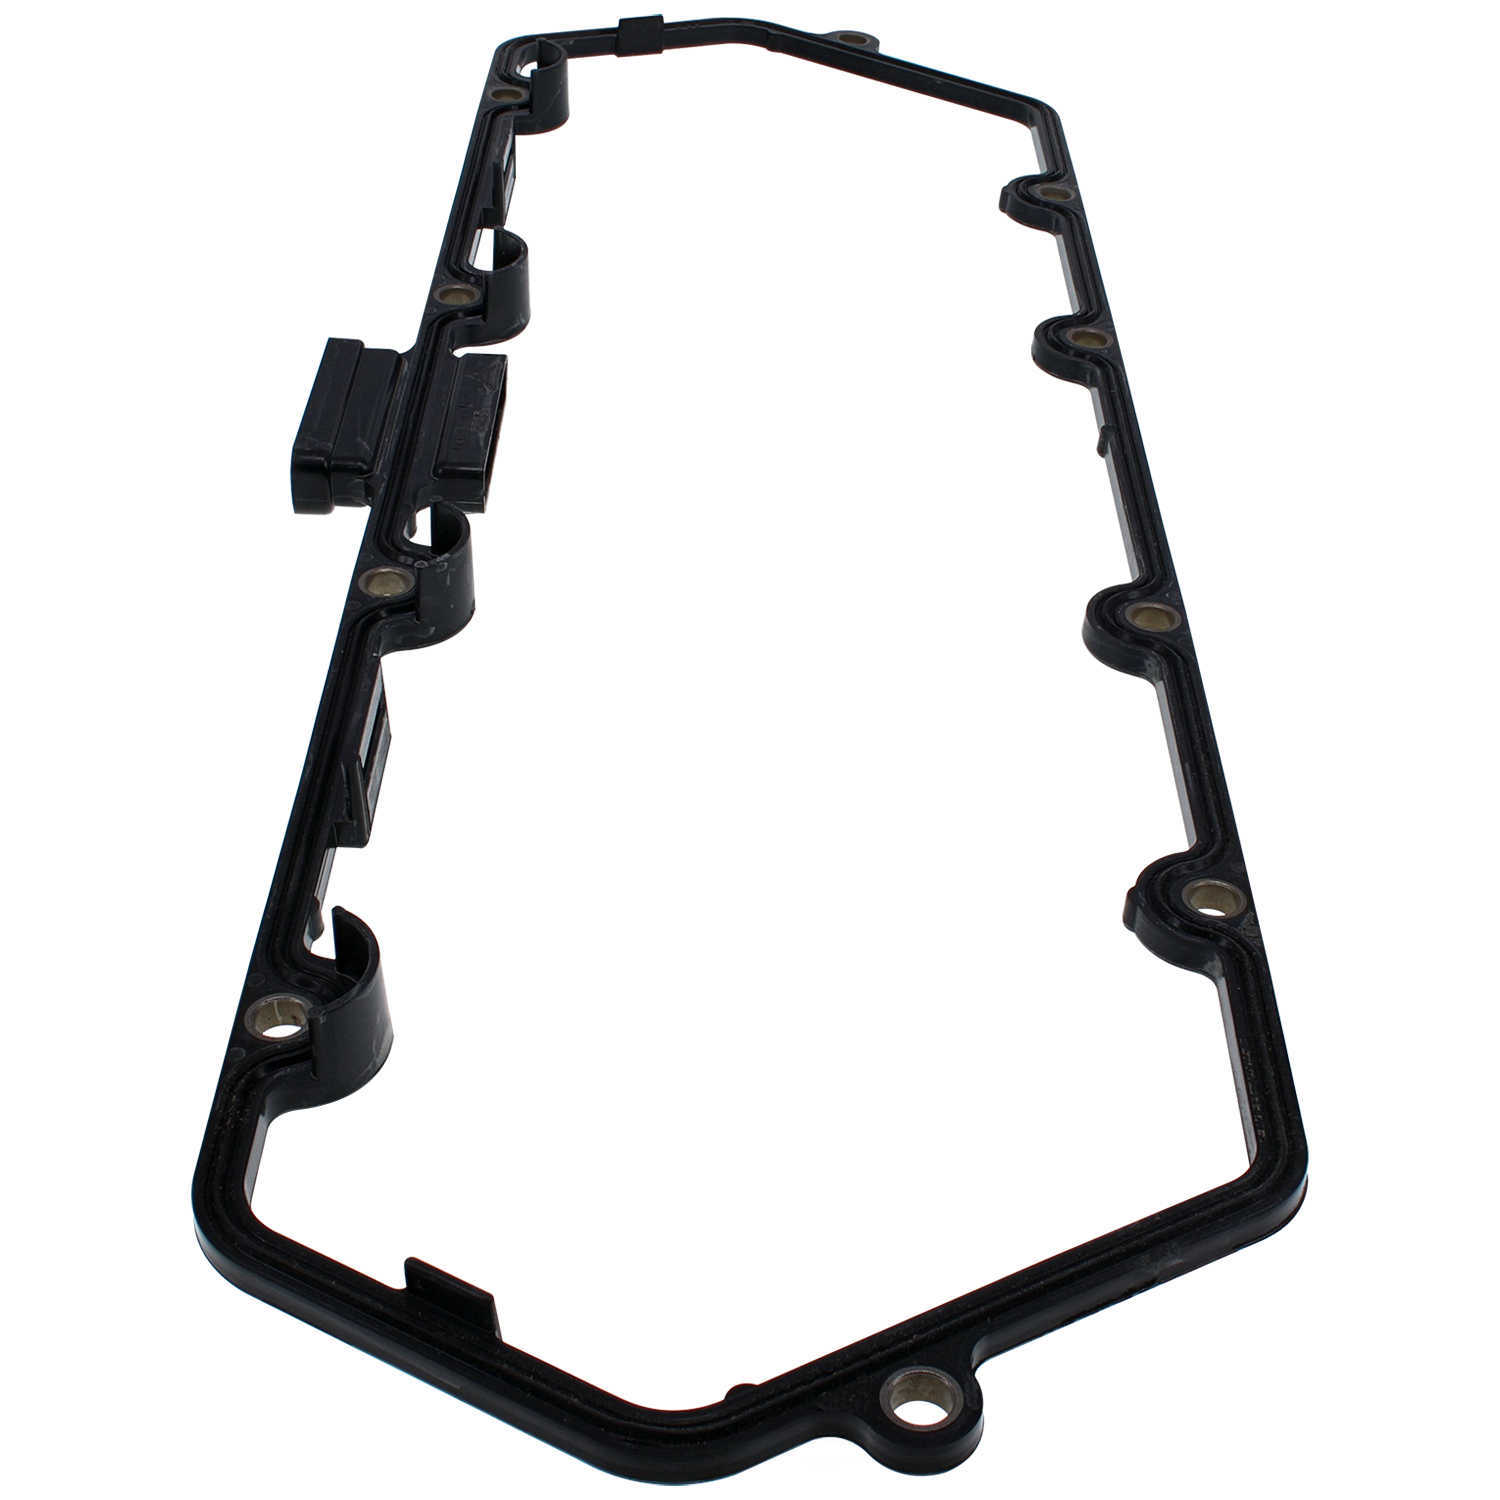 GB REMANUFACTURING INC. - Valve Cover Gasket - GBR 522-003